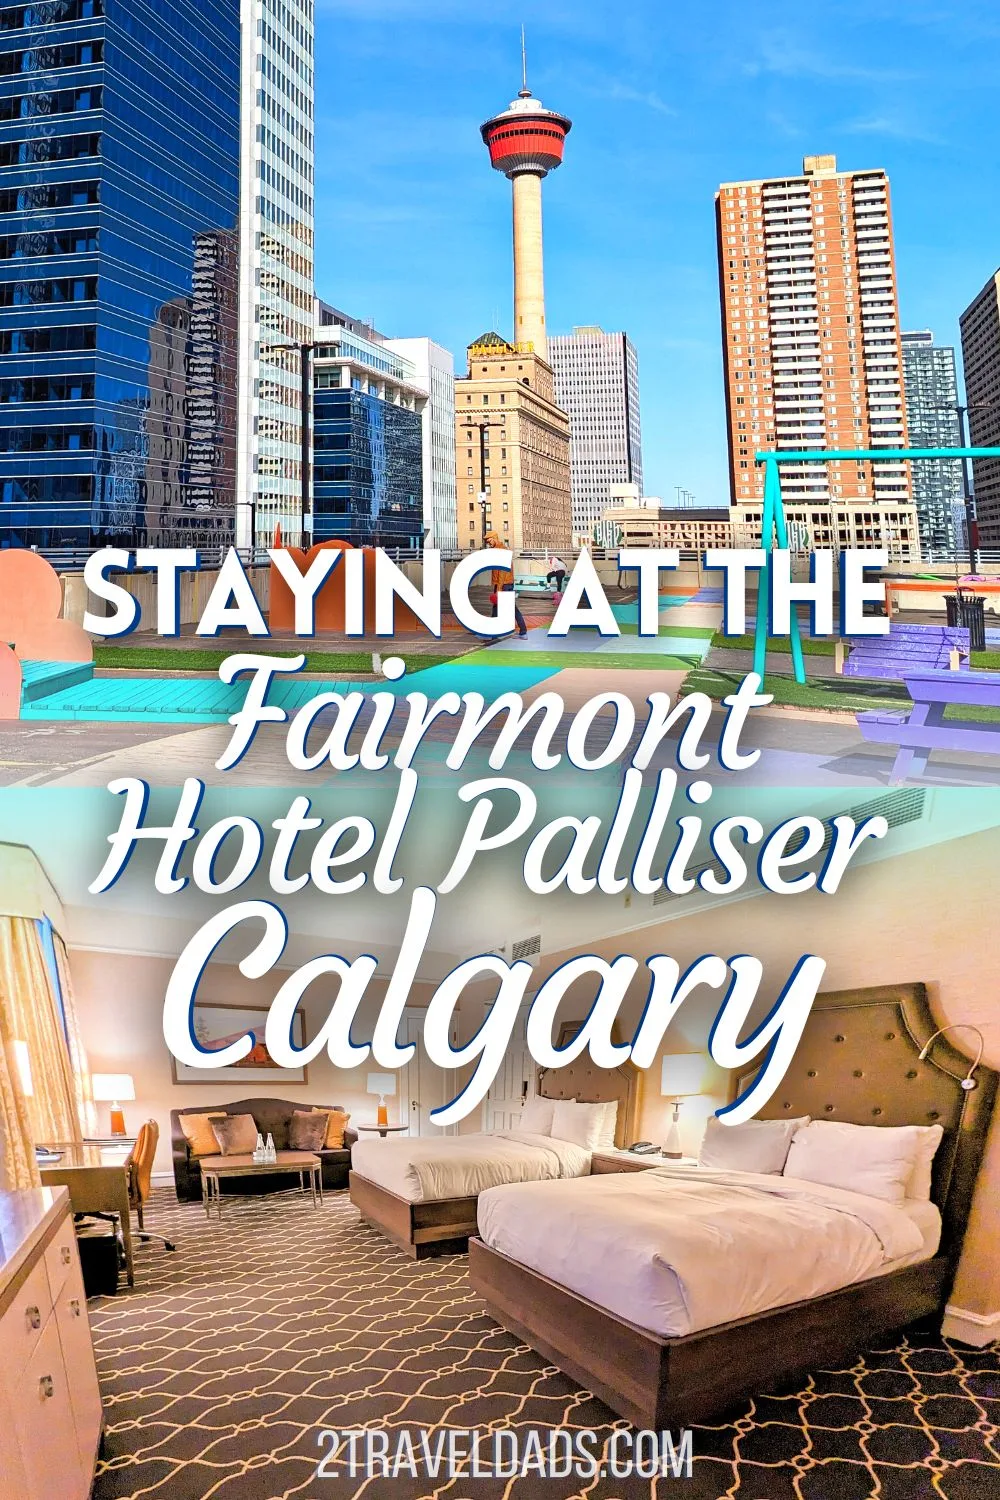 We just stayed at the historic Fairmont Palliser Hotel in downtown Calgary and this is our review. Details about what we liked, the hotel amenities and ideas for fun things to do in downtown Calgary.